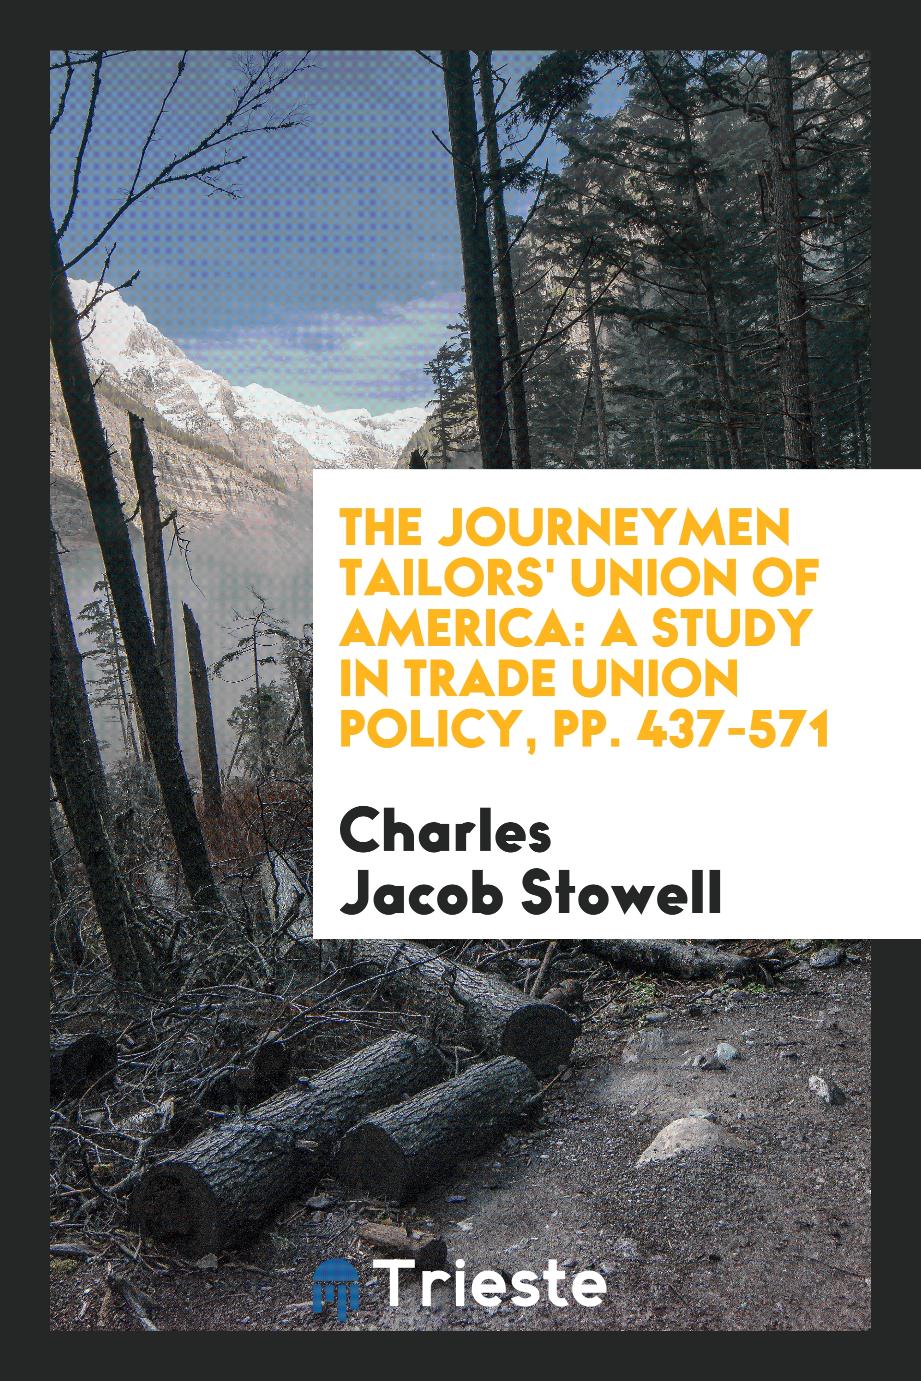 The Journeymen Tailors' Union of America: A Study in Trade Union Policy, pp. 437-571